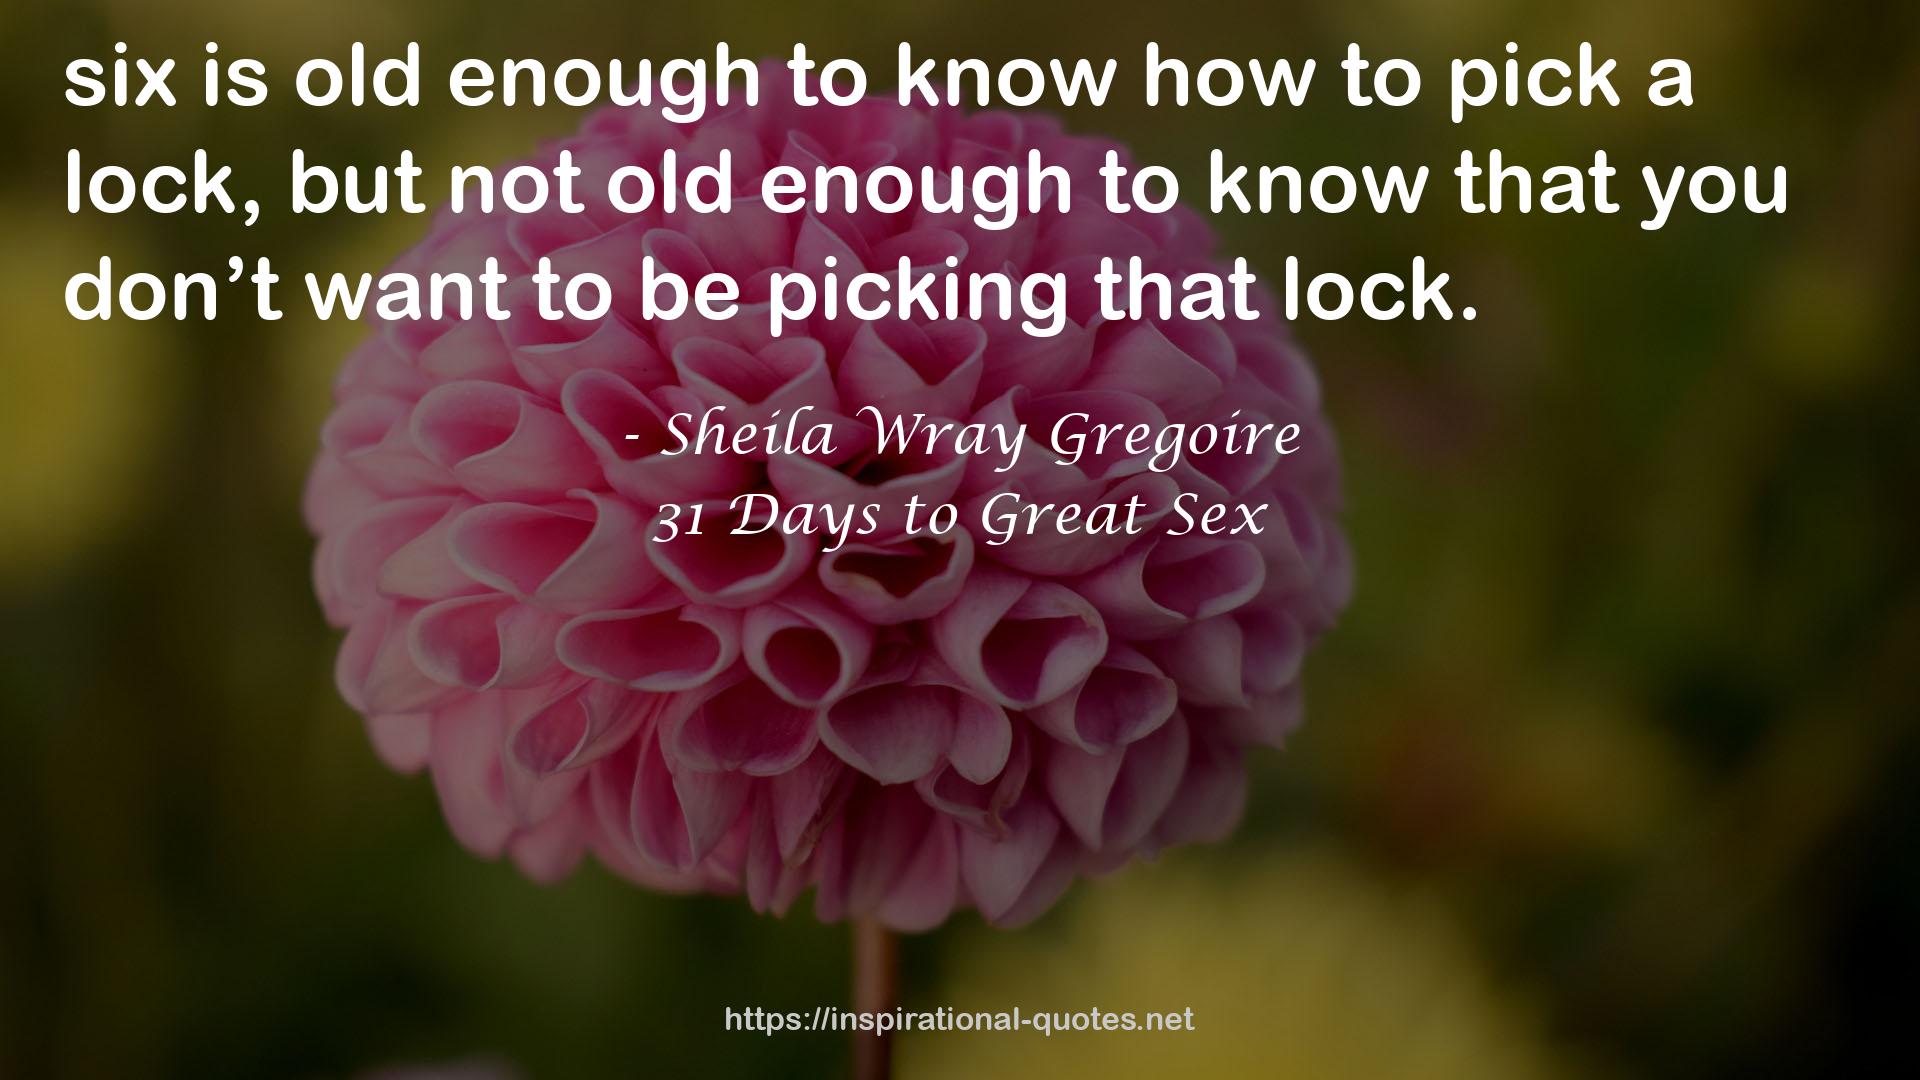 31 Days to Great Sex QUOTES